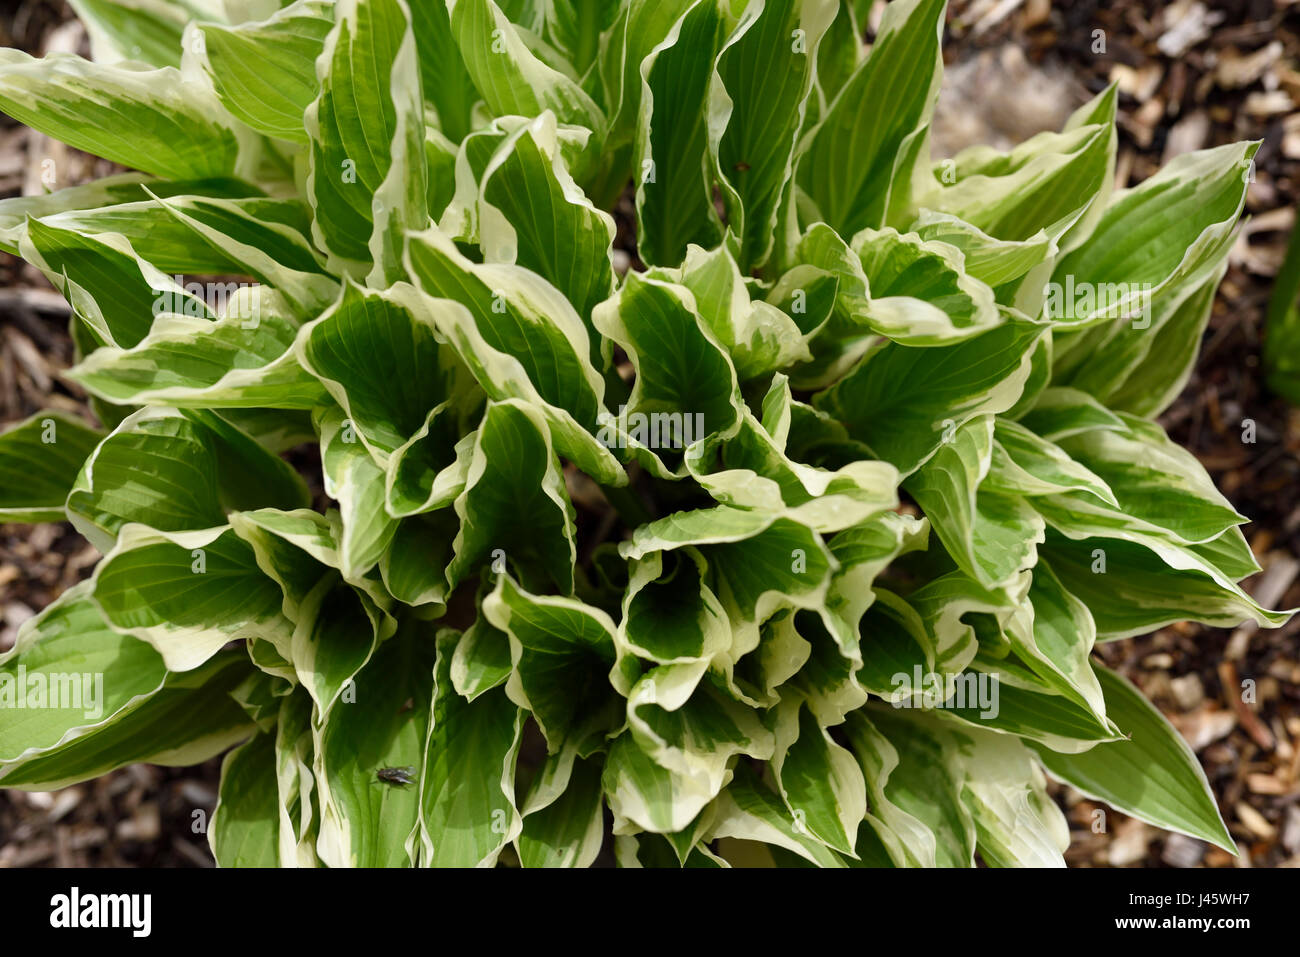 Green and white Hosta leaves emerging in a garden with wood chips in Spring after a rain Stock Photo